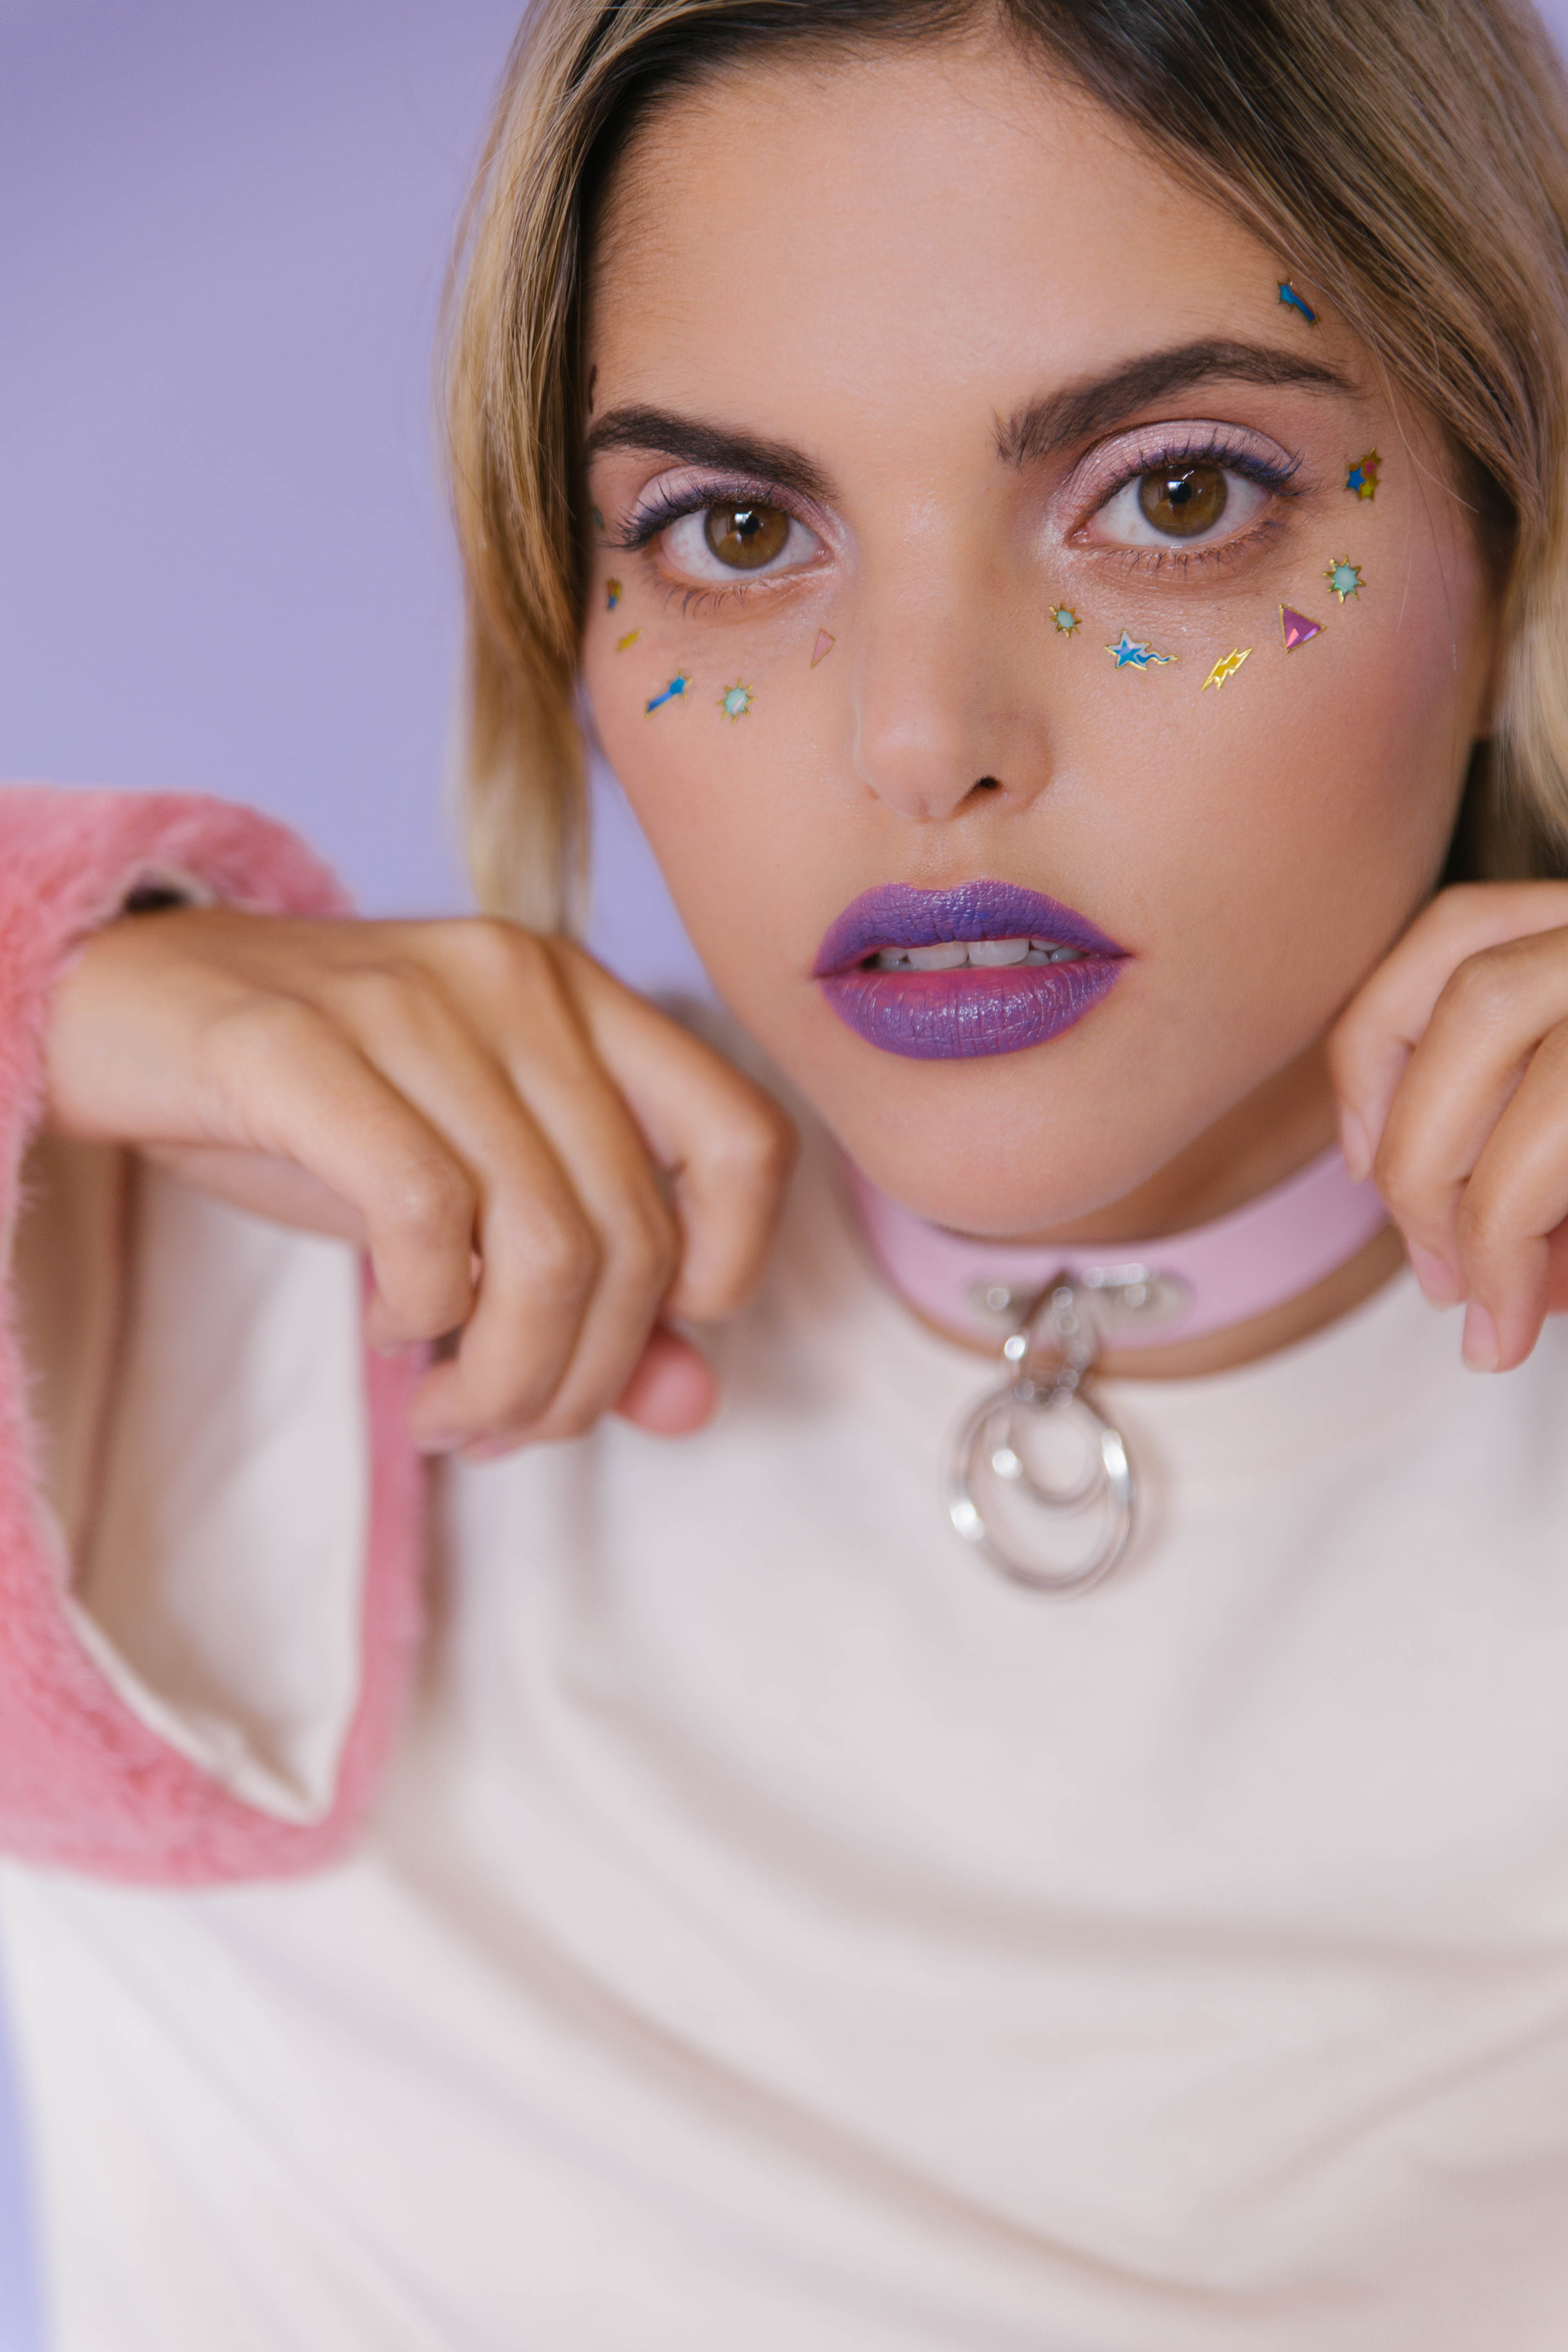 Candy Says Editorial by Marie-Eve Rose